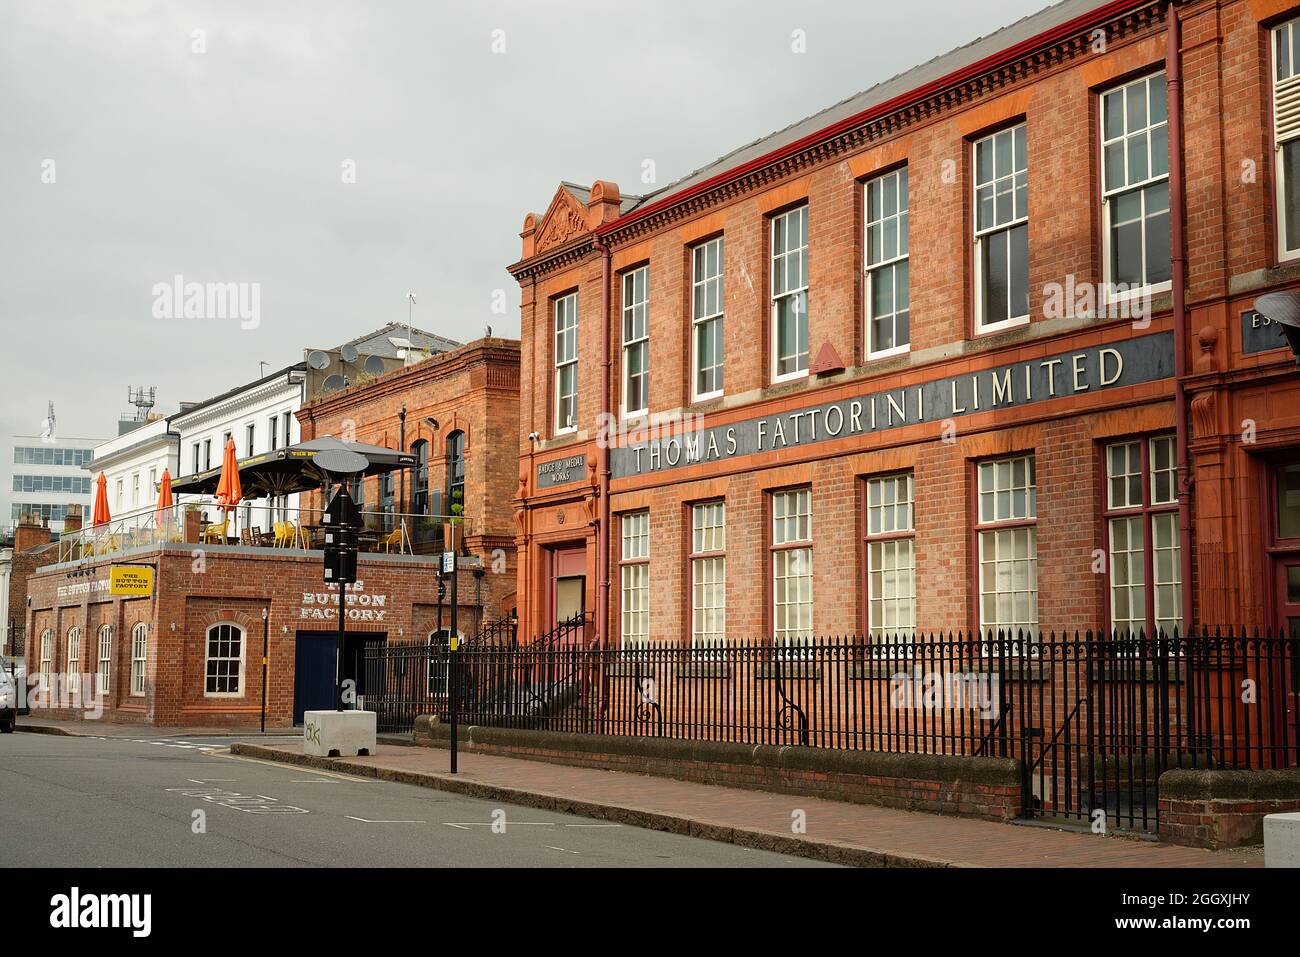 Thomas Fattorini Limited. The Jewellery quarter in Birmingham, England. Buildings in central Birmingham that housed jewellery companies. Stock Photo